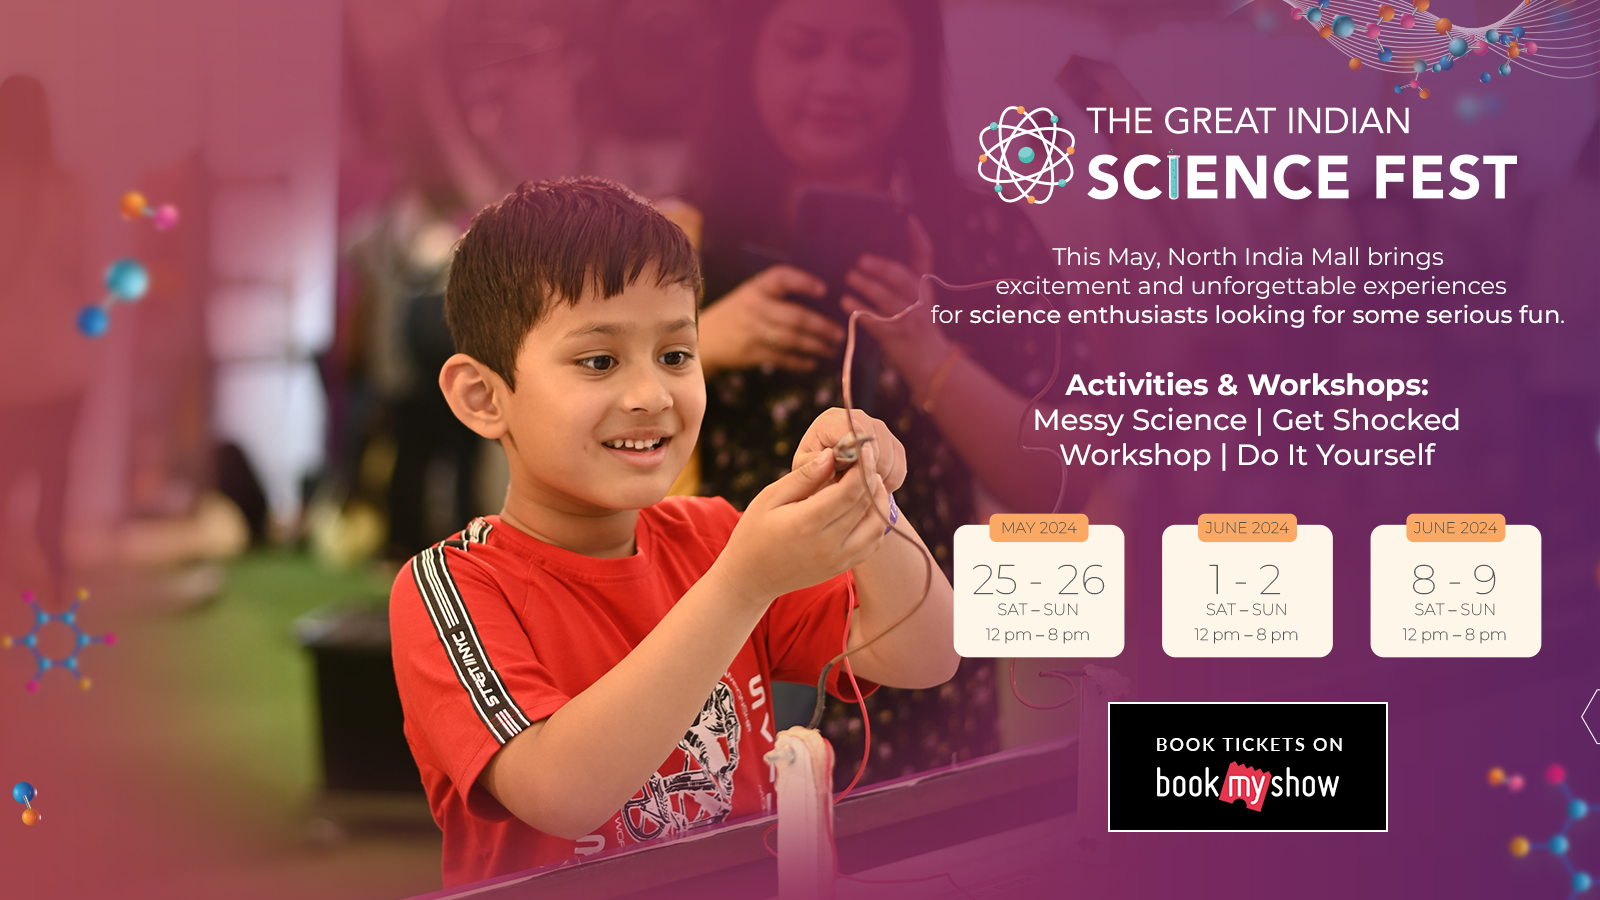 Image: GREAT INDIAN SCIENCE FEST 2024